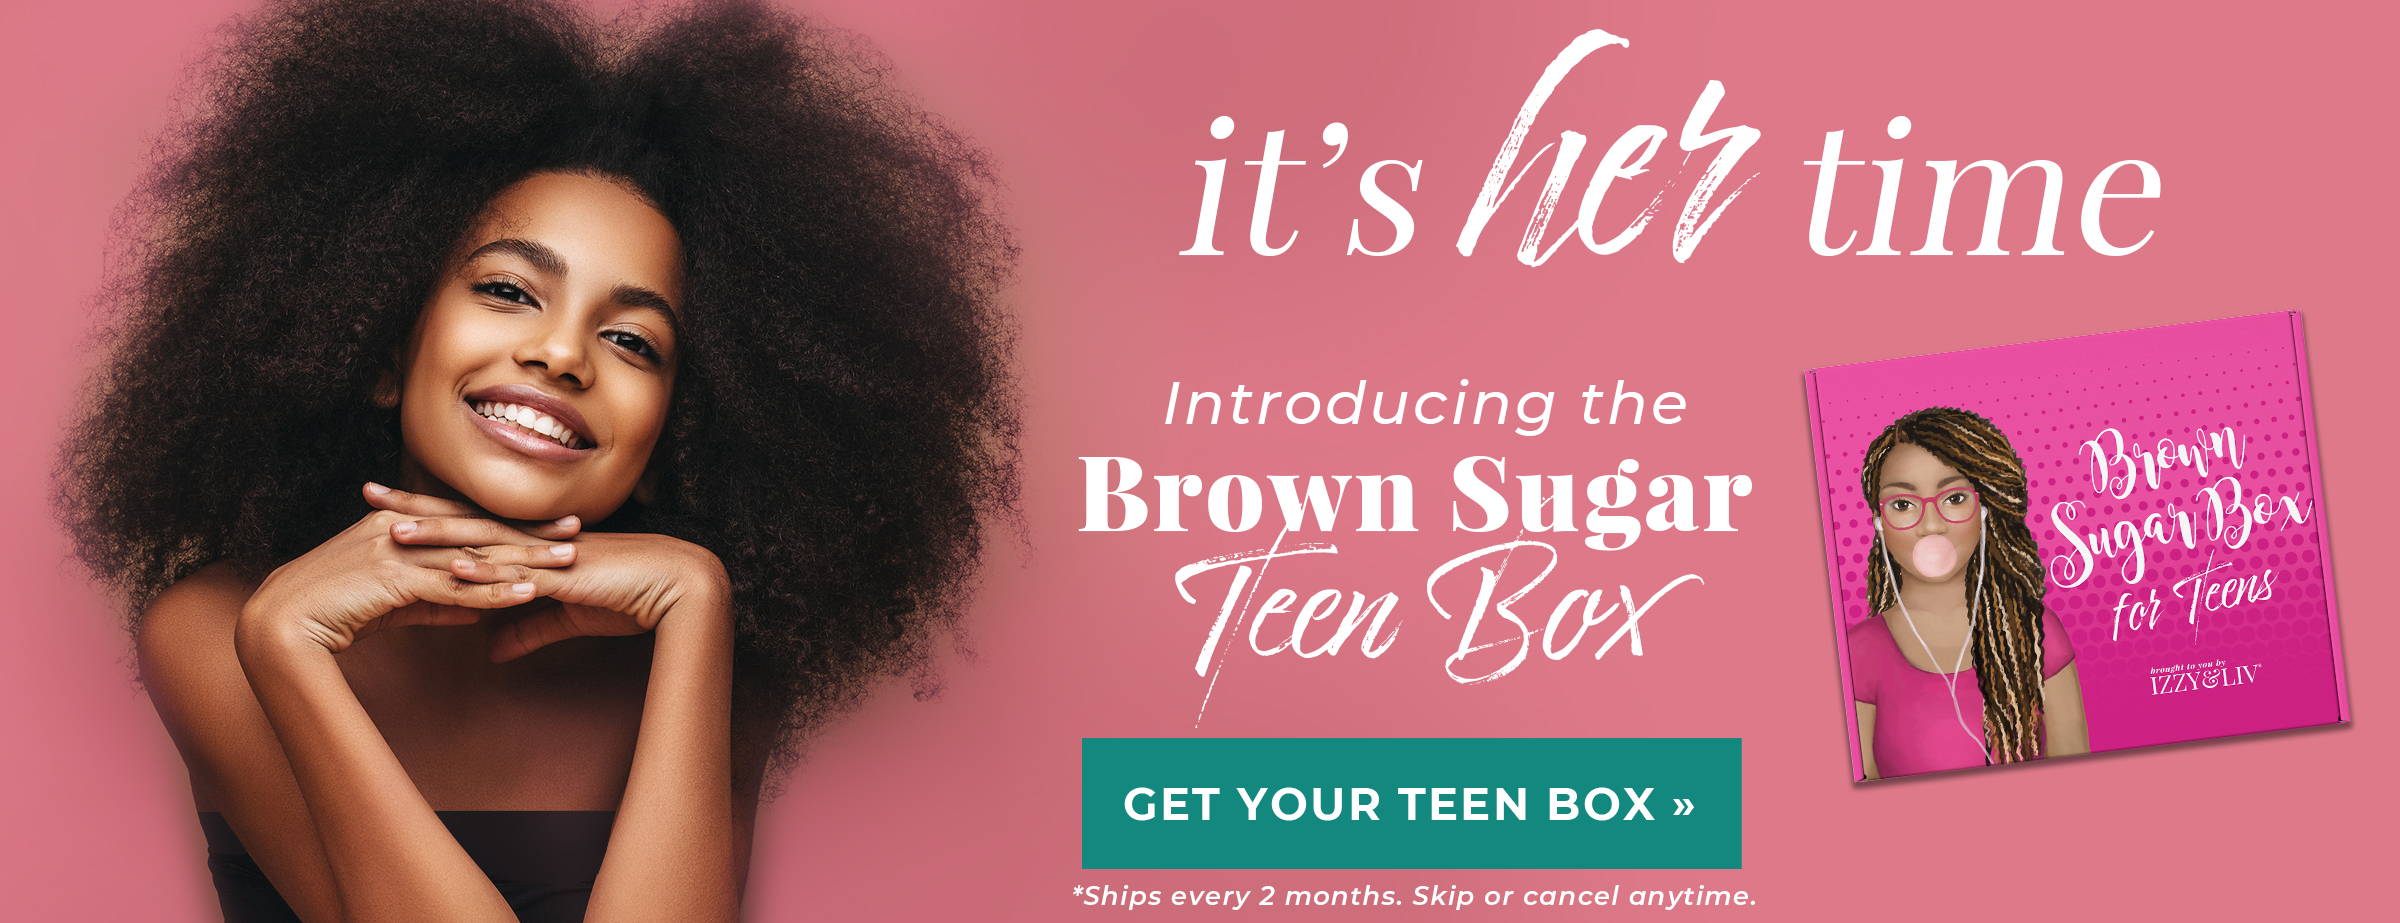 It's Her Time - Introducing the Brown Sugar Teen Box!